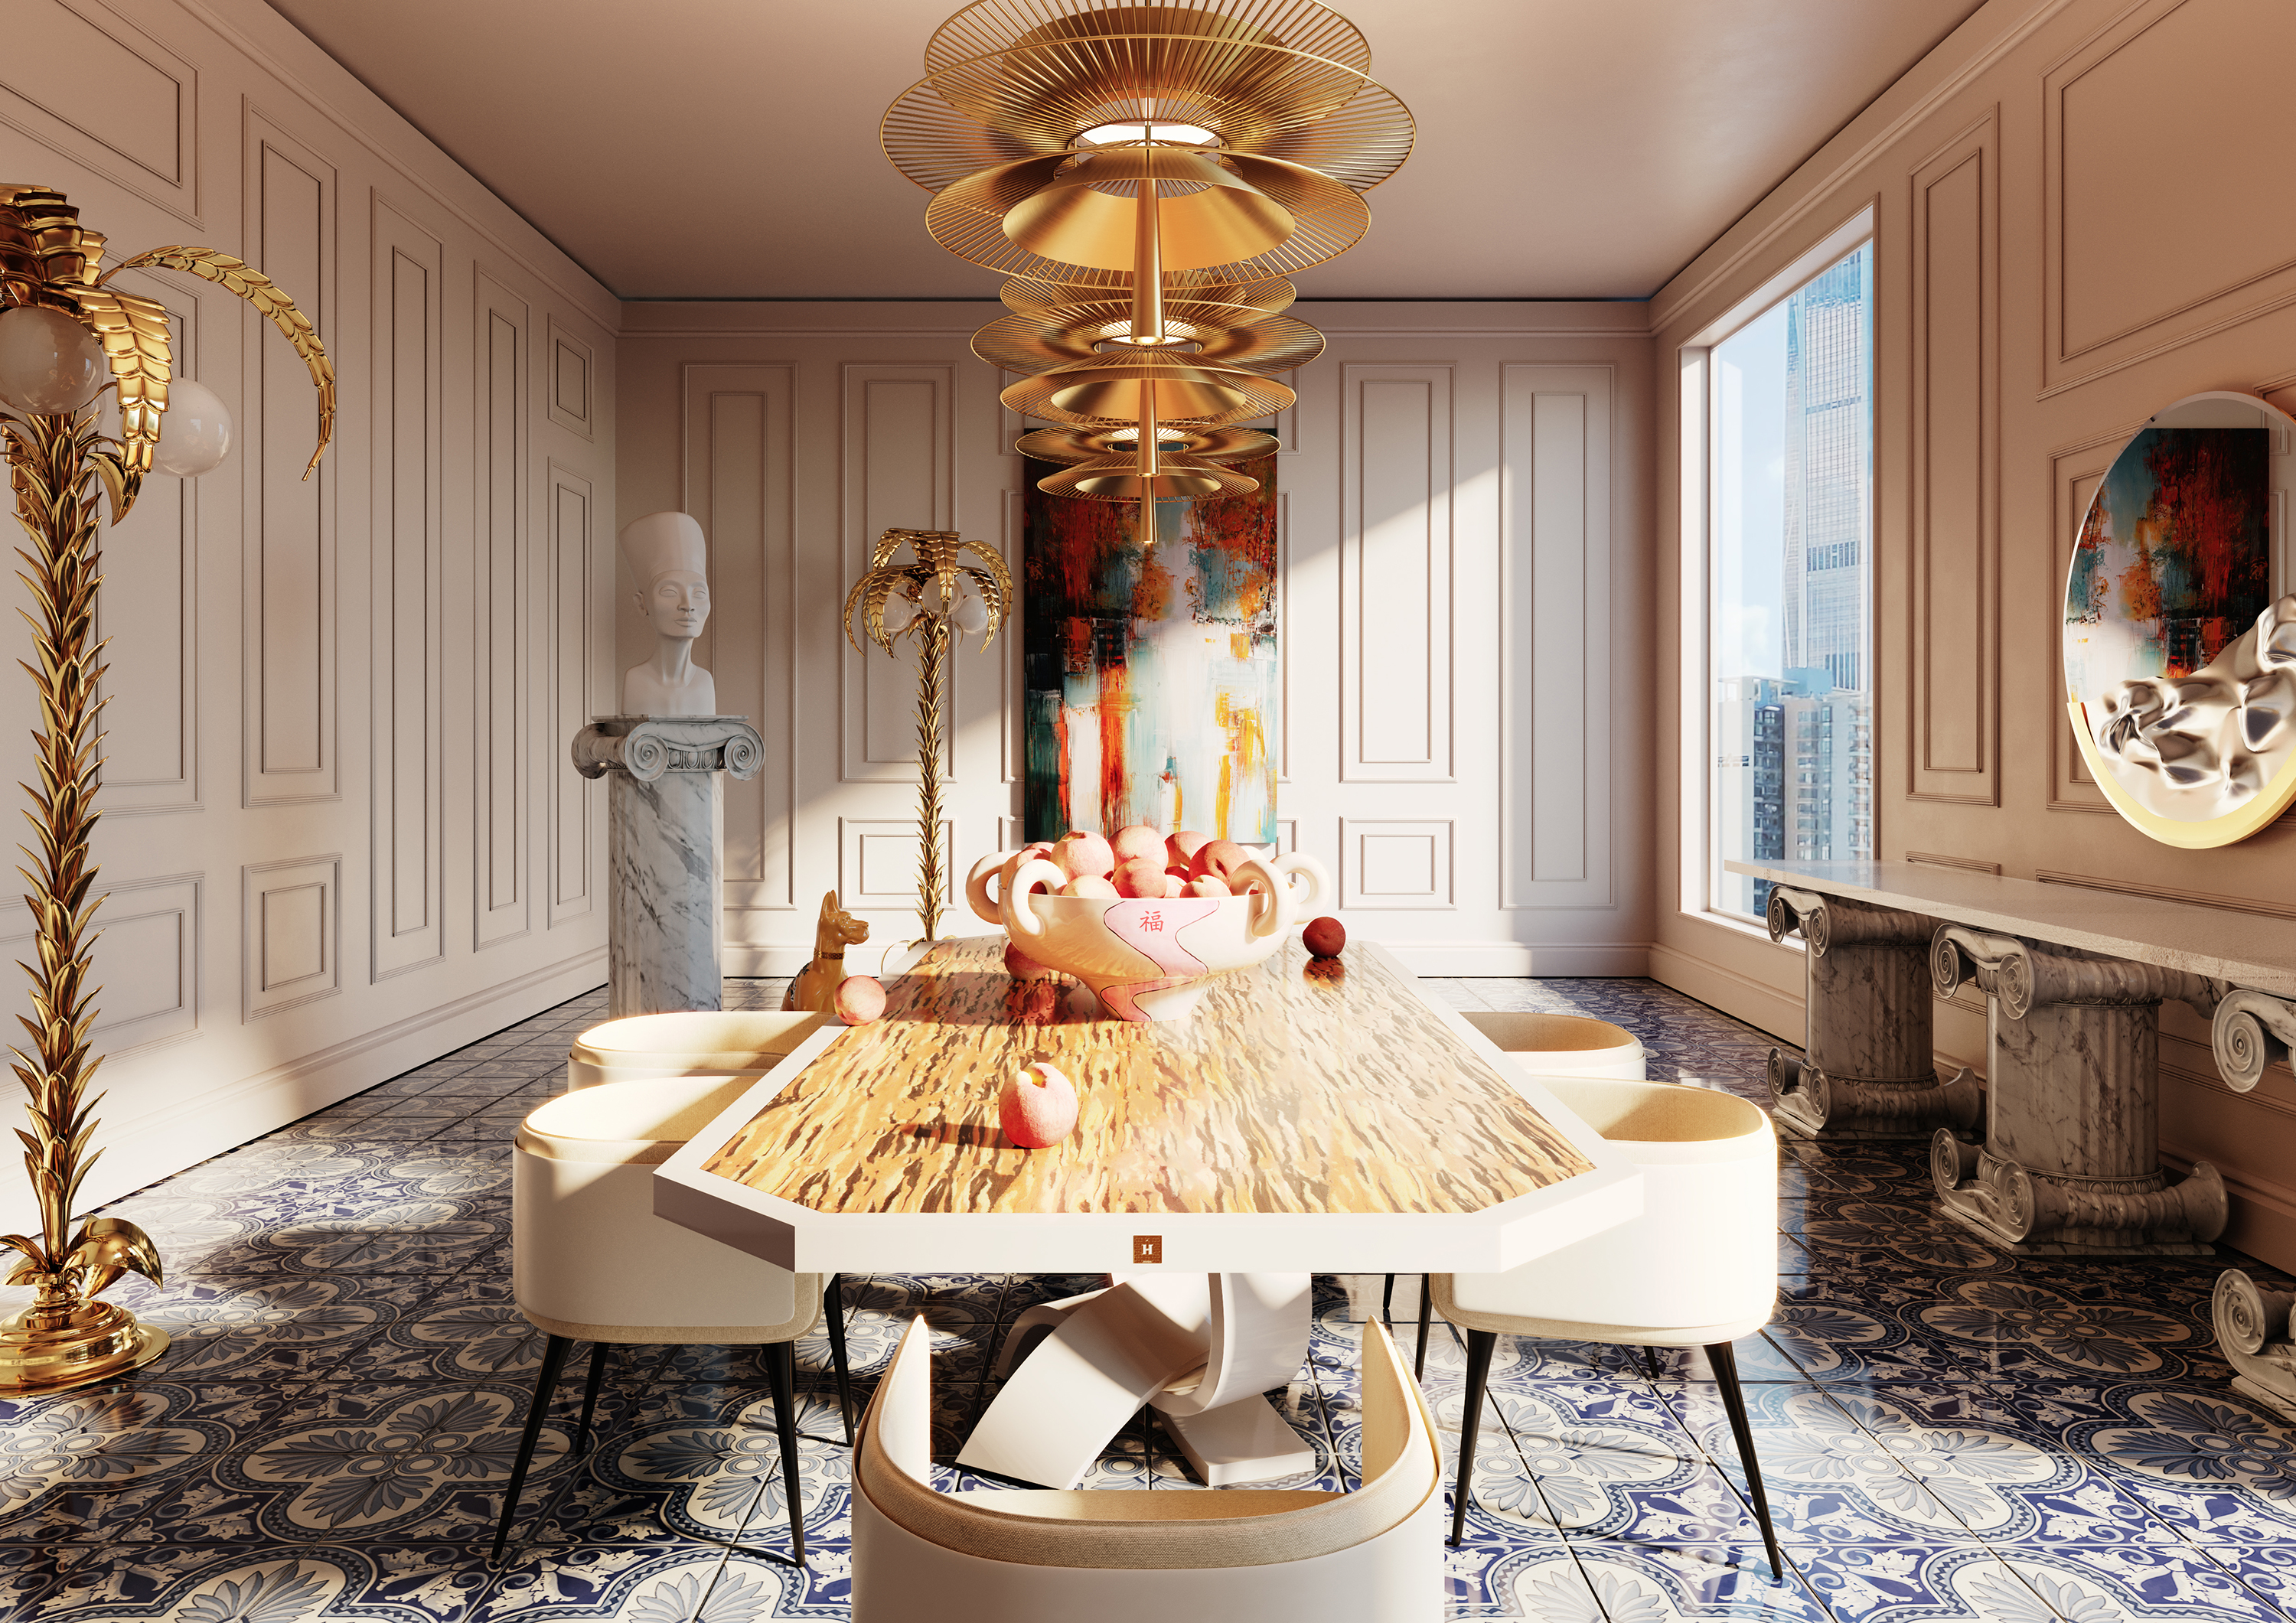 Dining Room Sets Inspiration For The Next Dinner Parties At Your ...